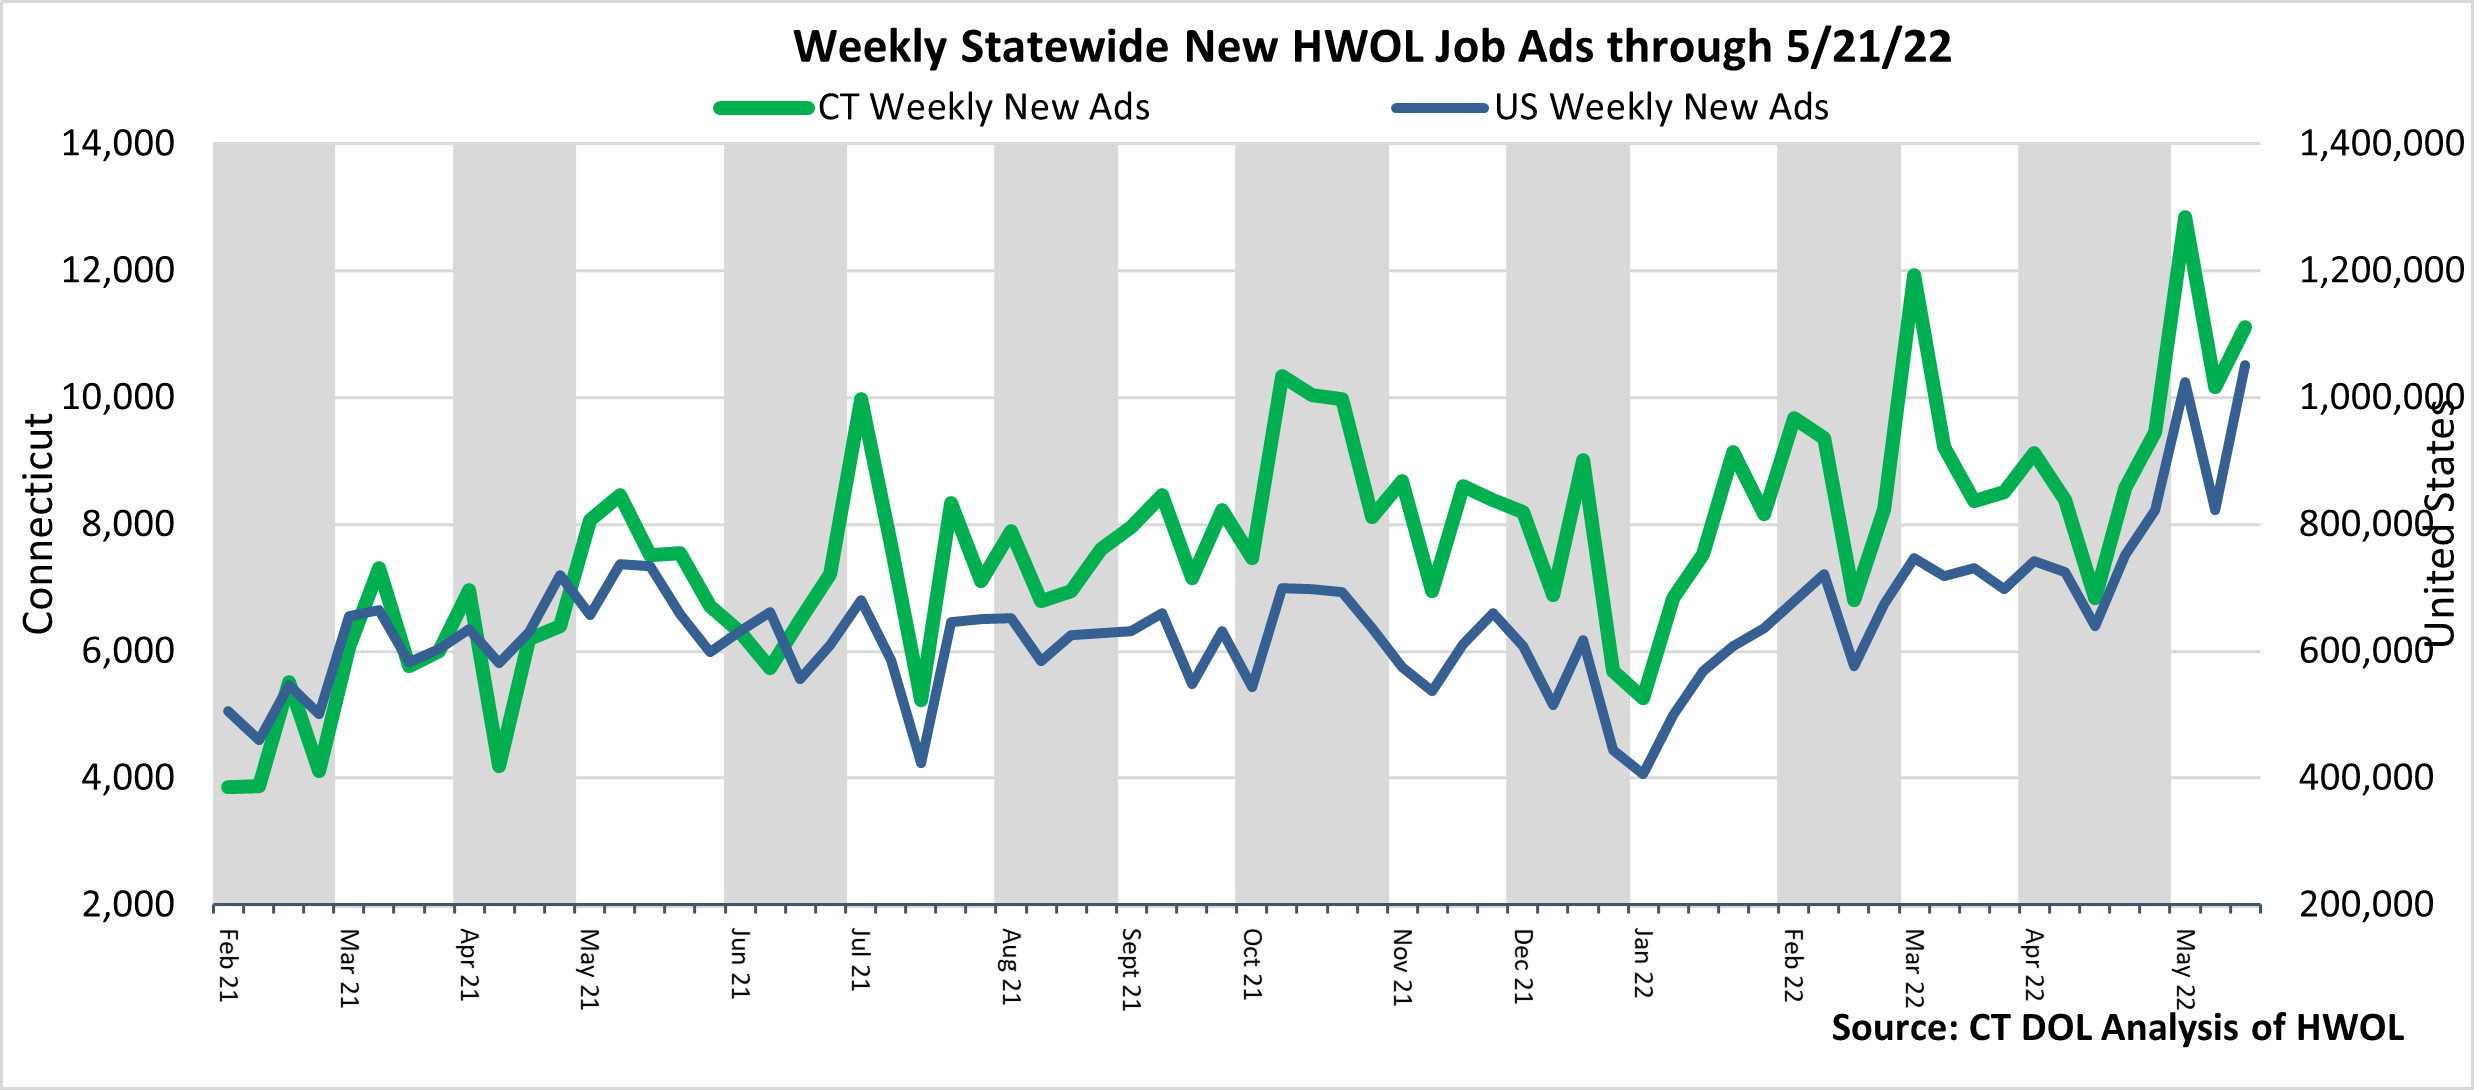 Connecticut Weekly Statewide New HWOL Job Ads through 05/07/22